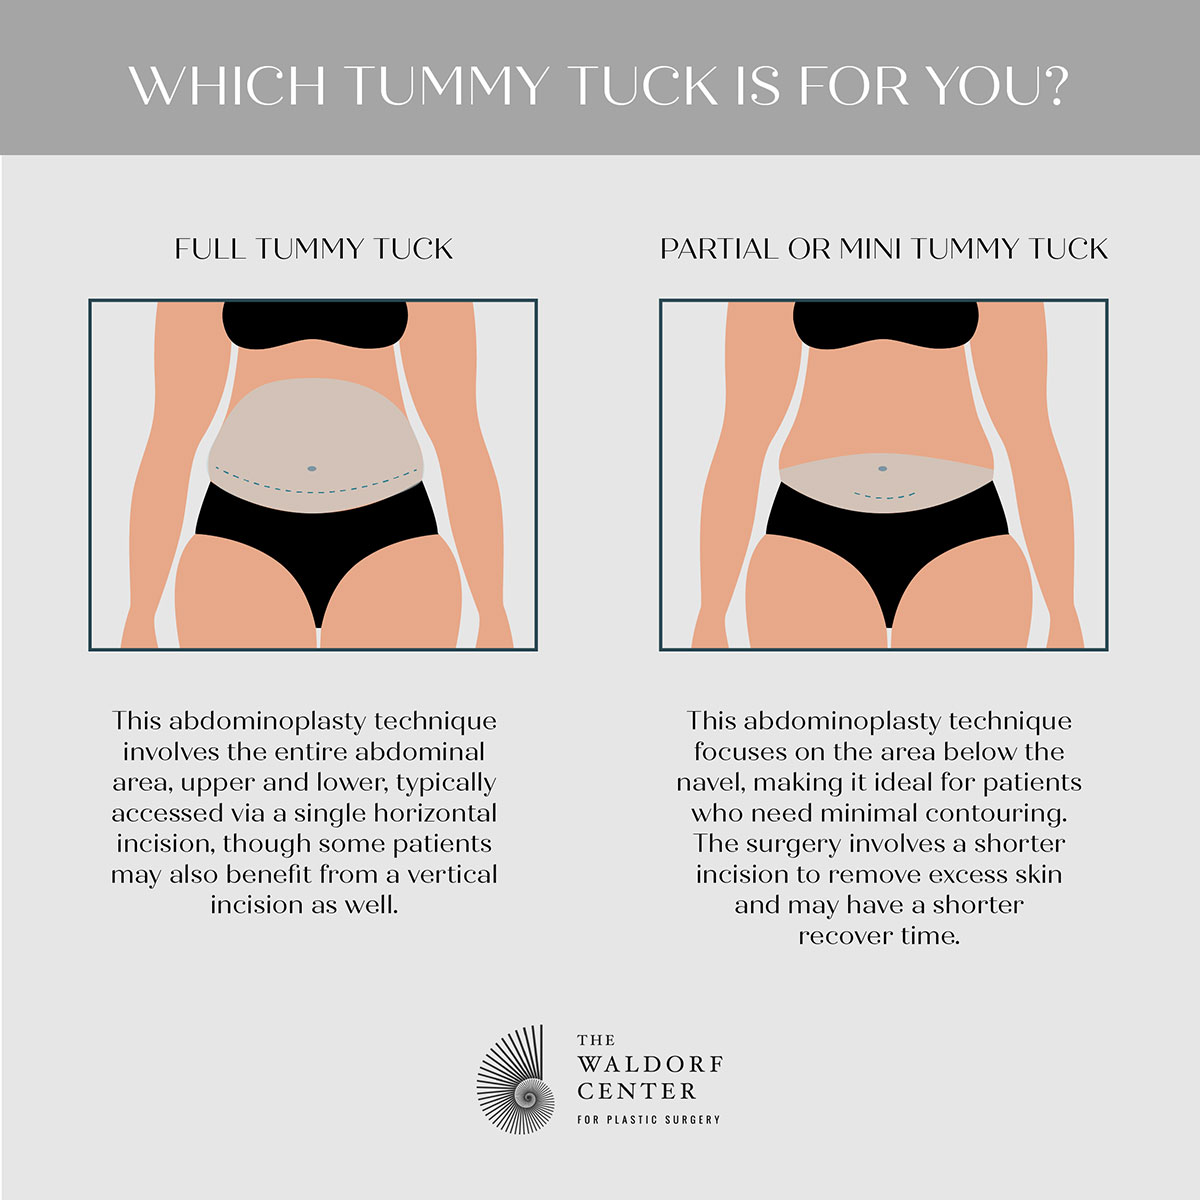 My tummy tuck recovery story (and recovery tips)